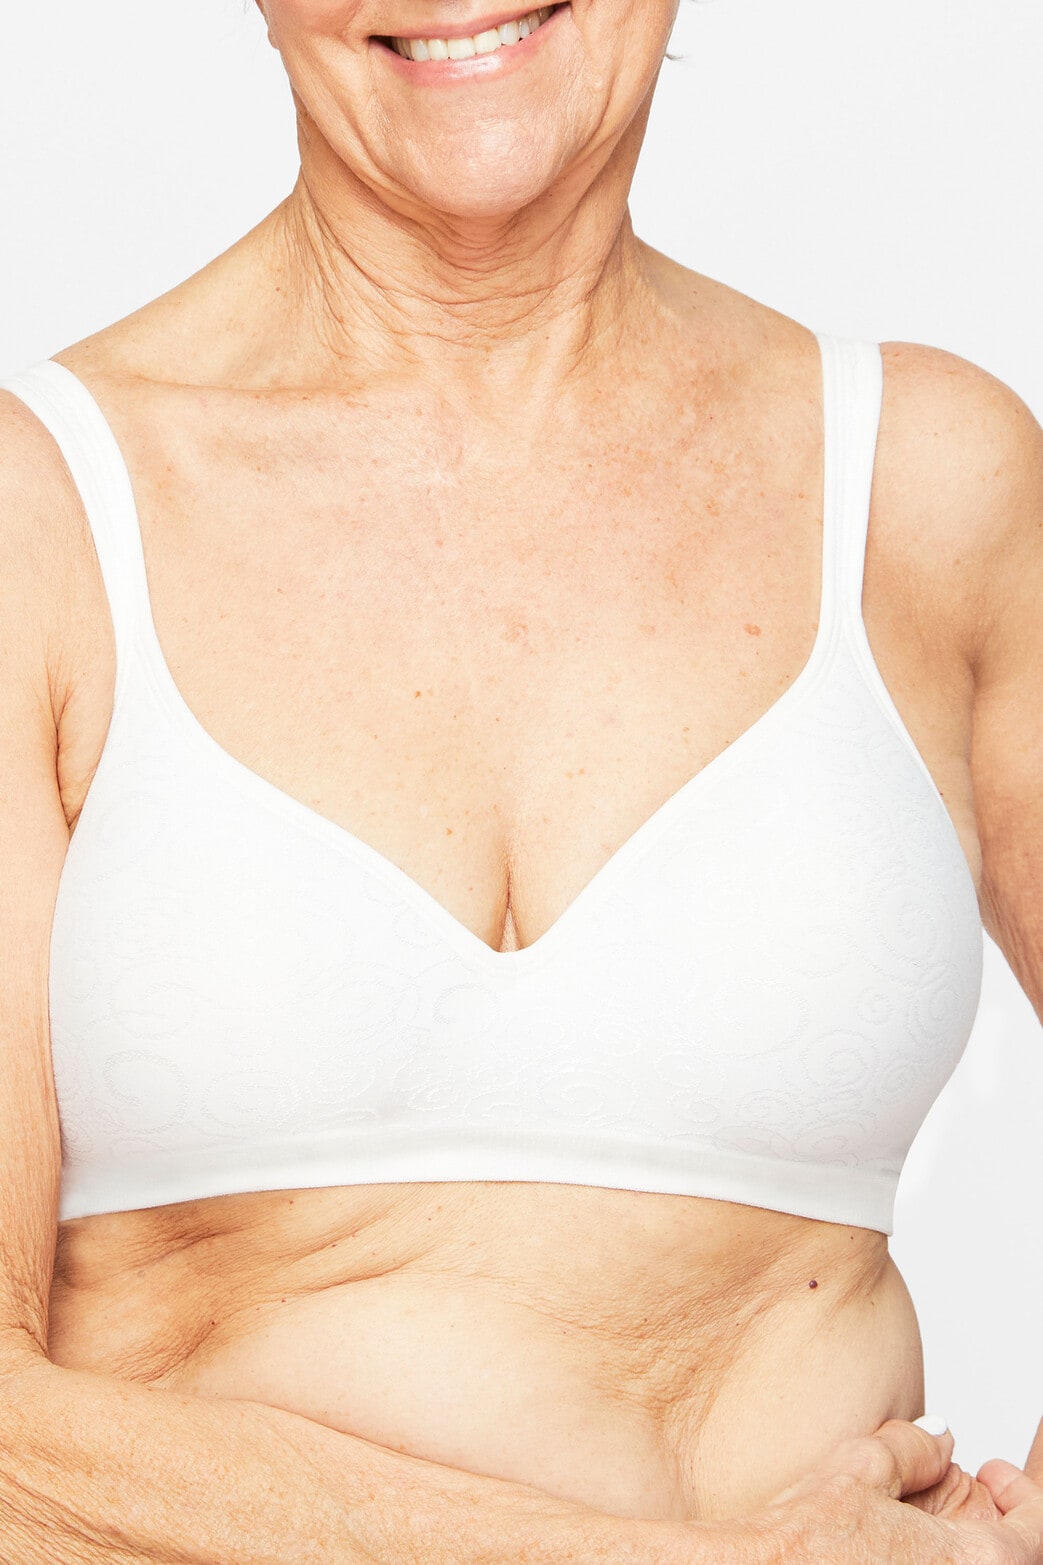 The Riza T-Fit Bra is more than just a bra, it's a revolution! Say